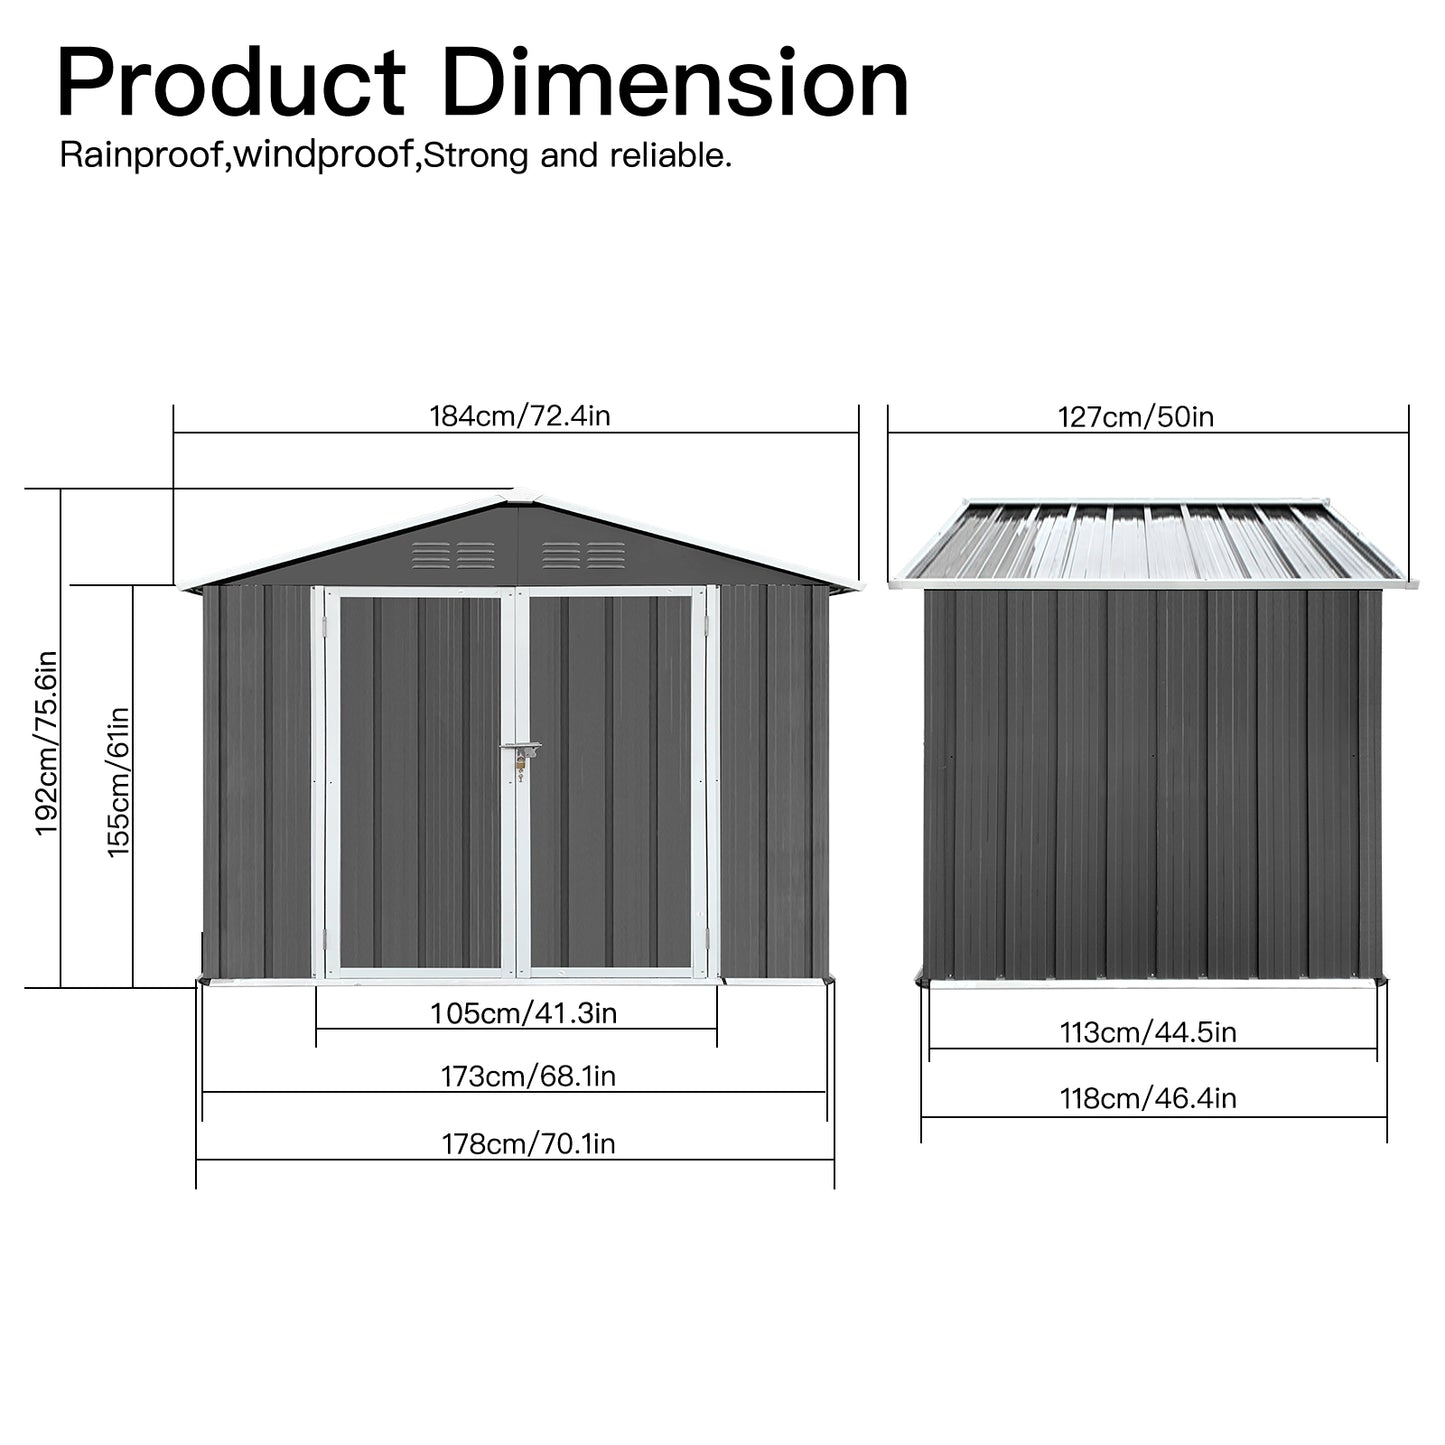 6' x 4' Outdoor Storage Shed, Metal Garden Shed with Lockable Doors, Tools Storage Shed for Backyard, Patio, Lawn, D9129